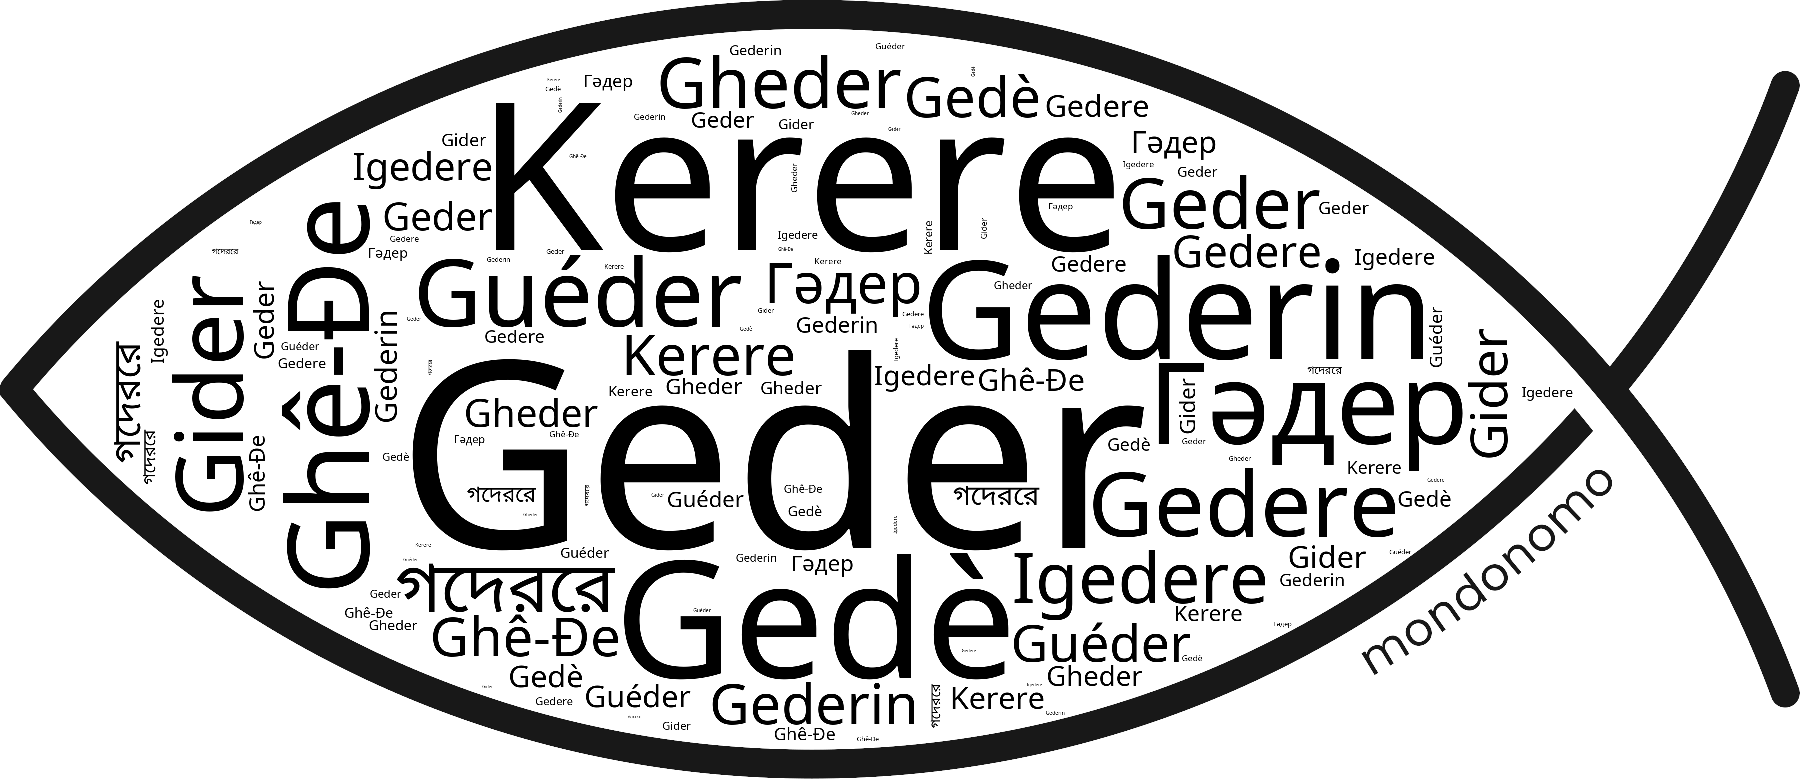 Name Geder in the world's Bibles